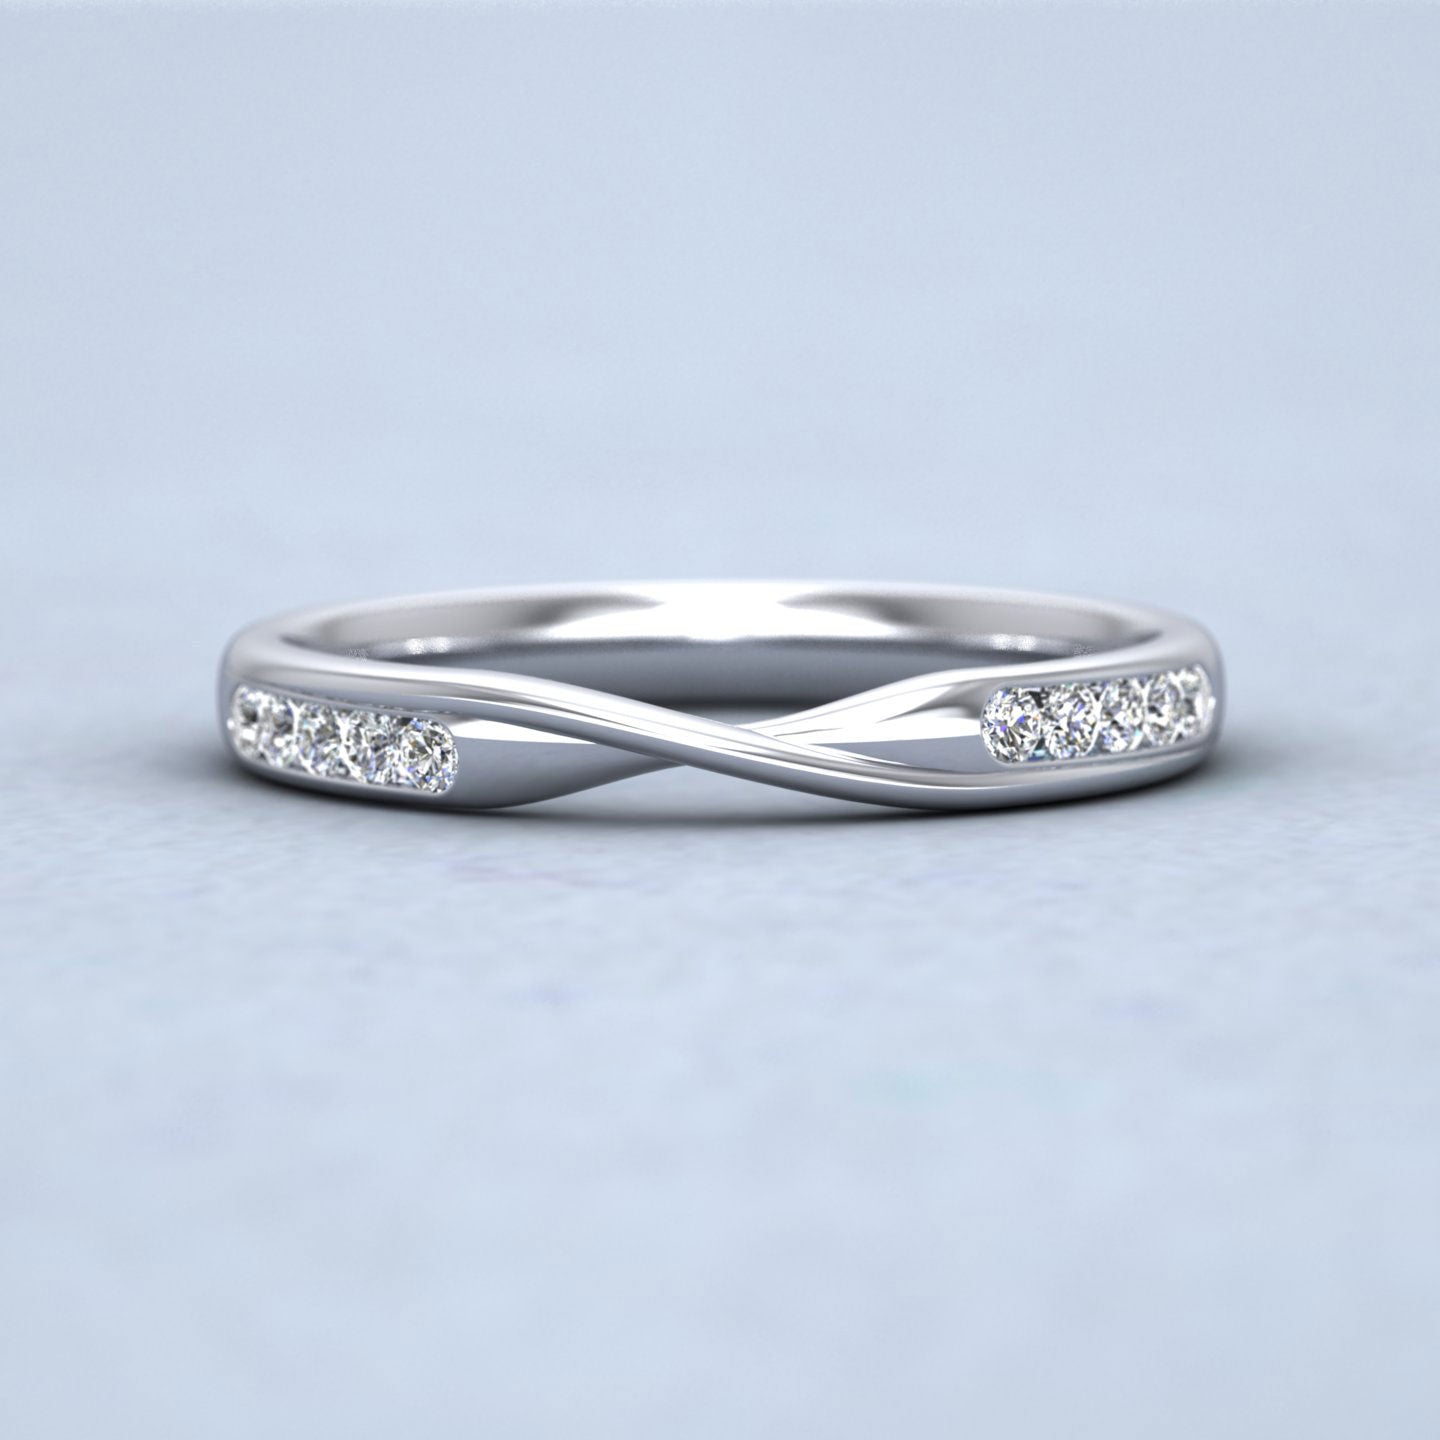 Crossover Pattern Wedding Ring In 9ct White Gold 2.5mm Wide With Eight Diamonds